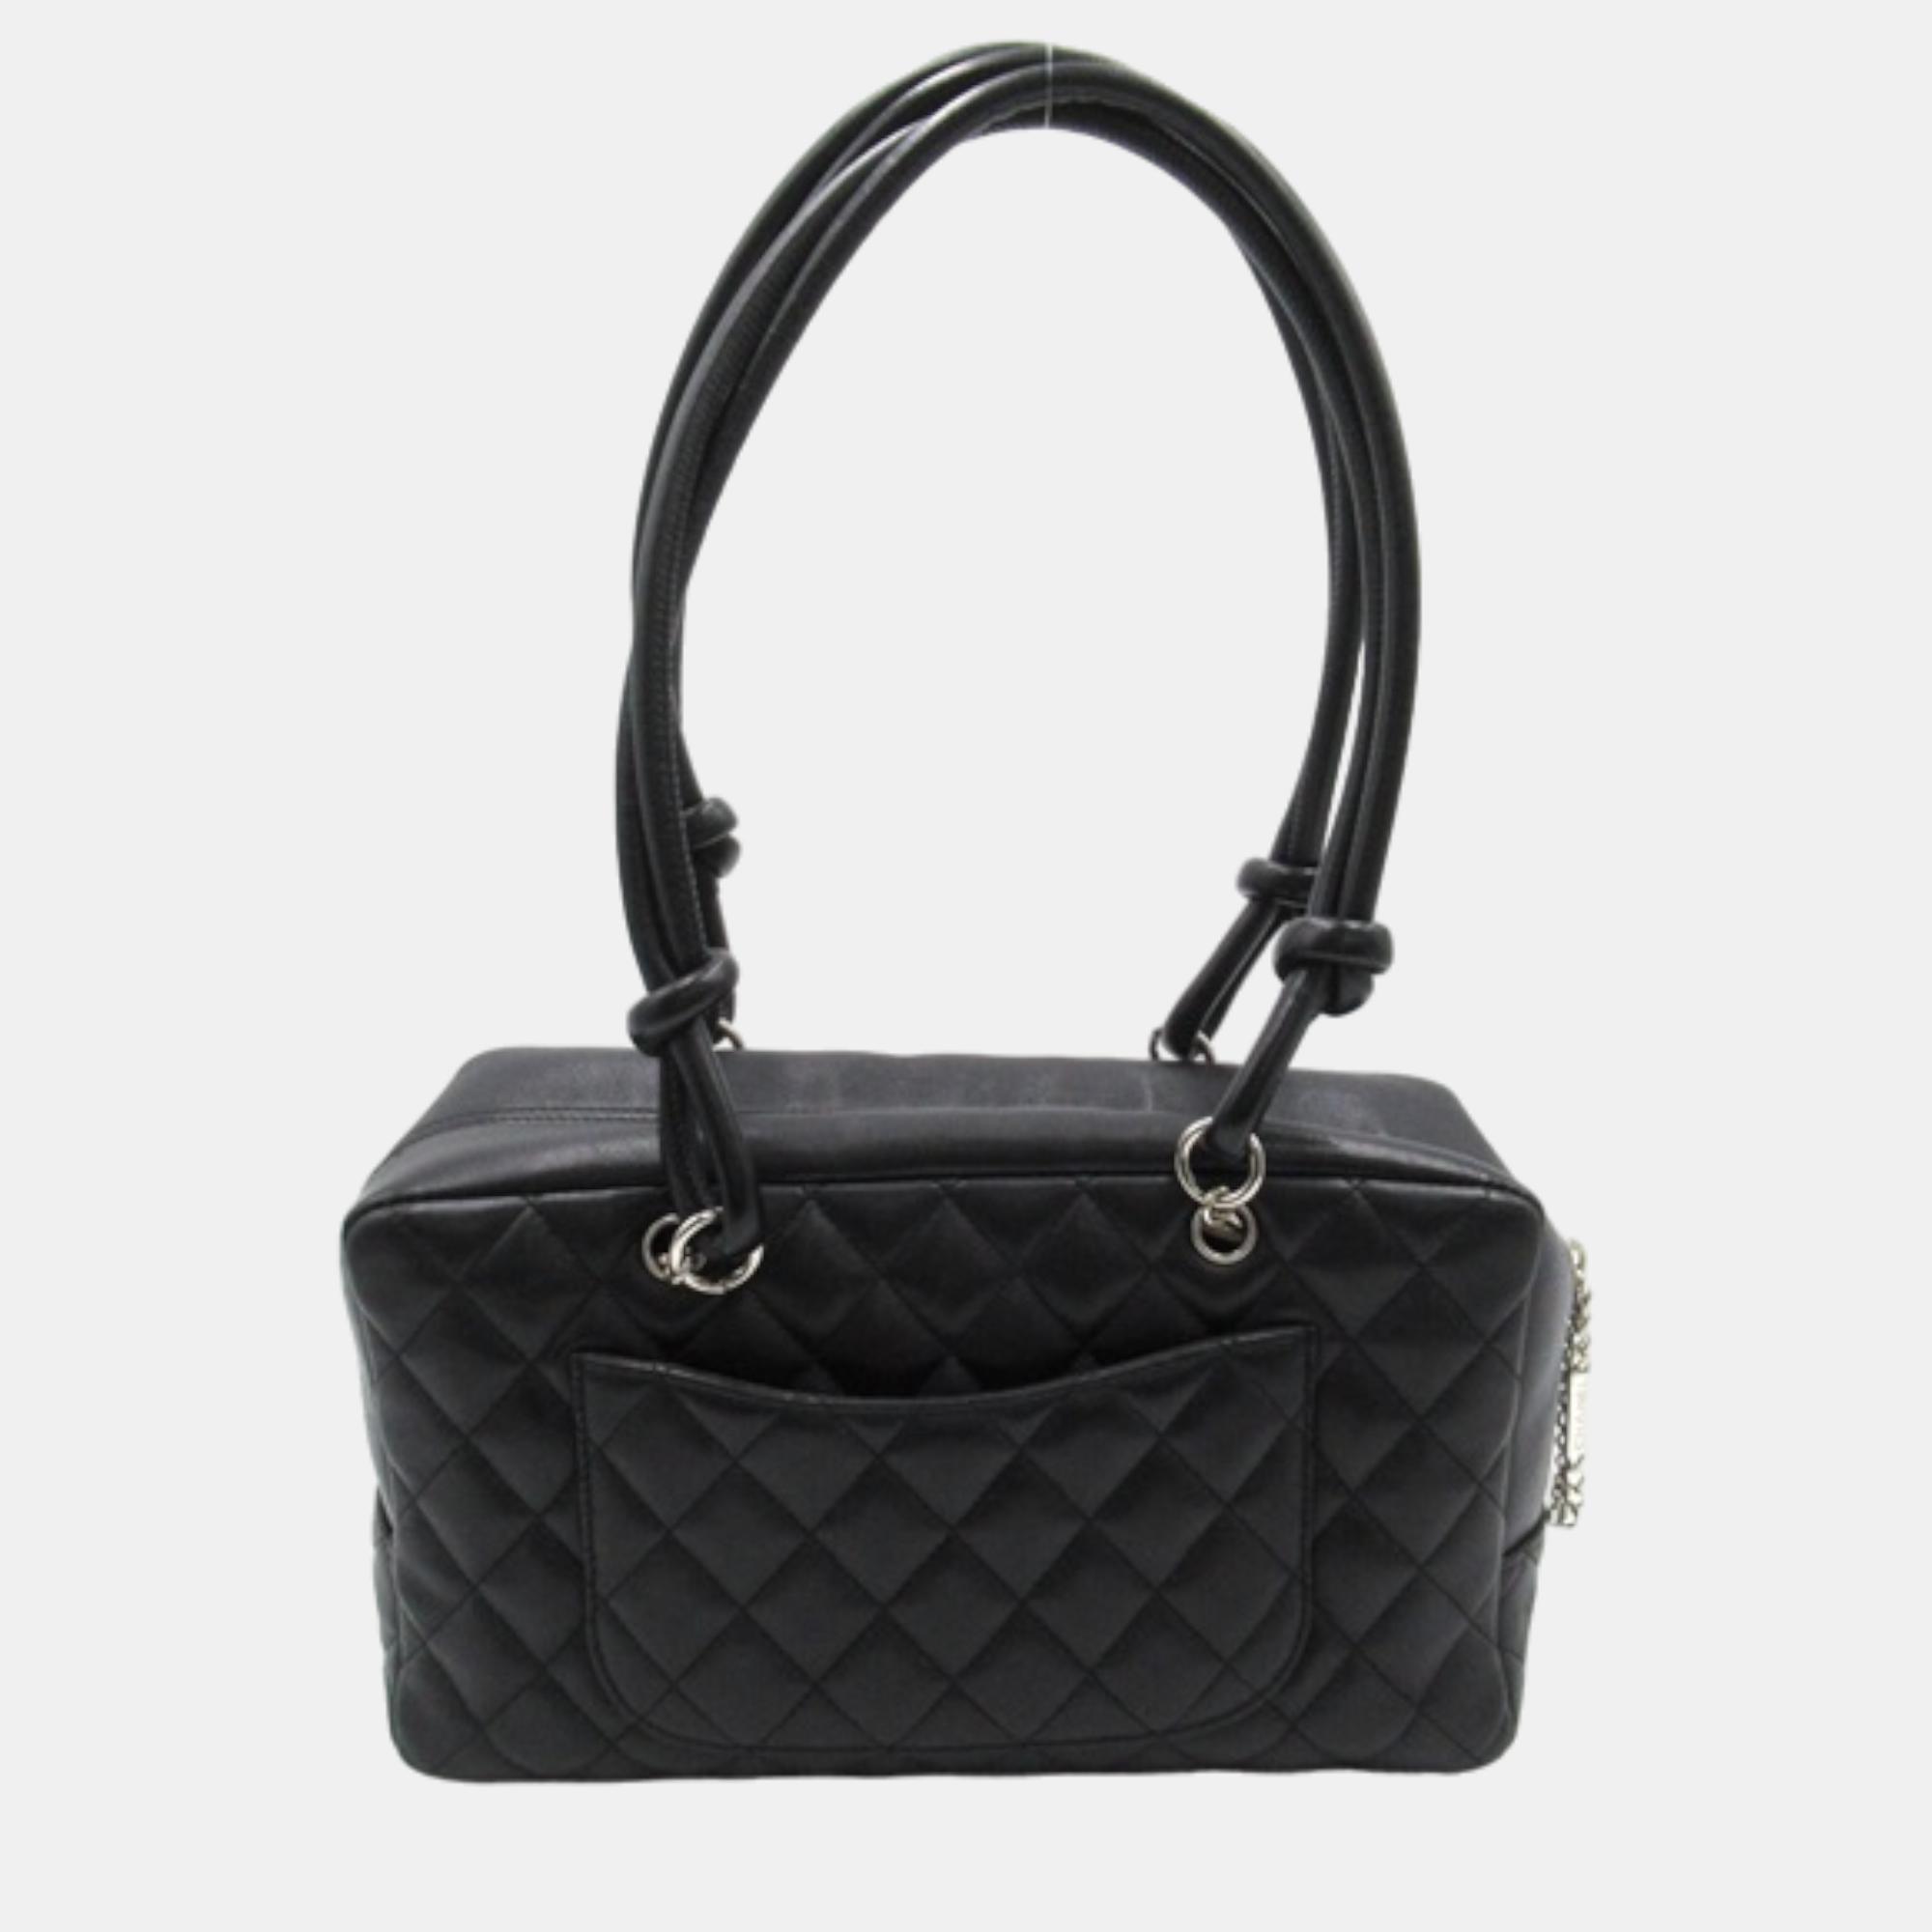 Chanel Black Cambon Quilted Leather Bowling Bag